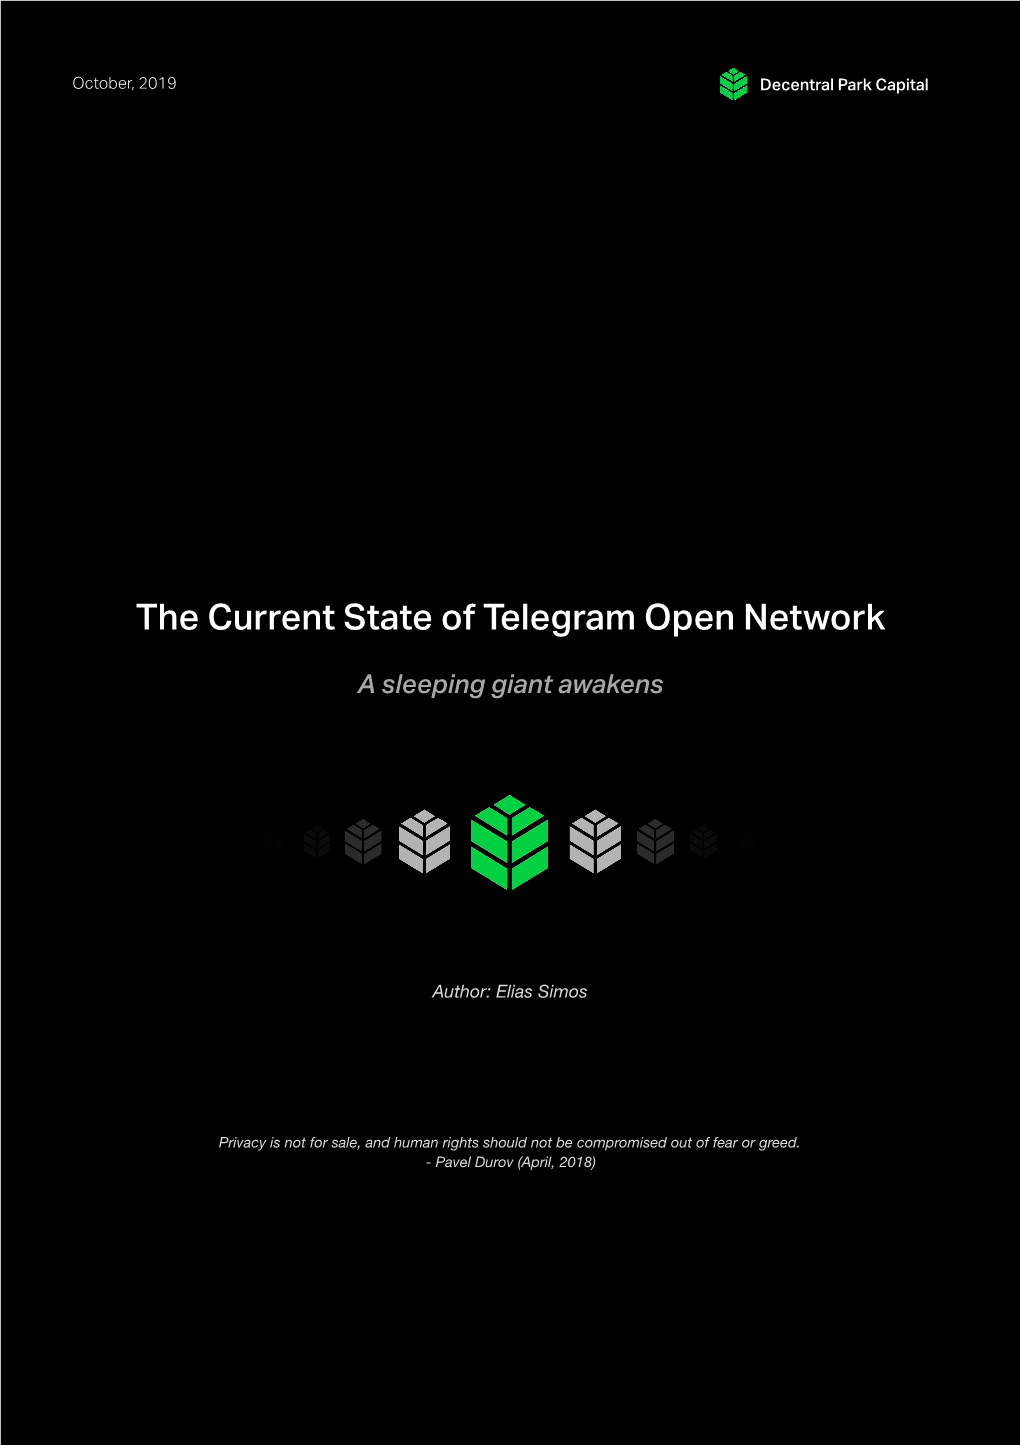 The Current State of Telegram Open Network